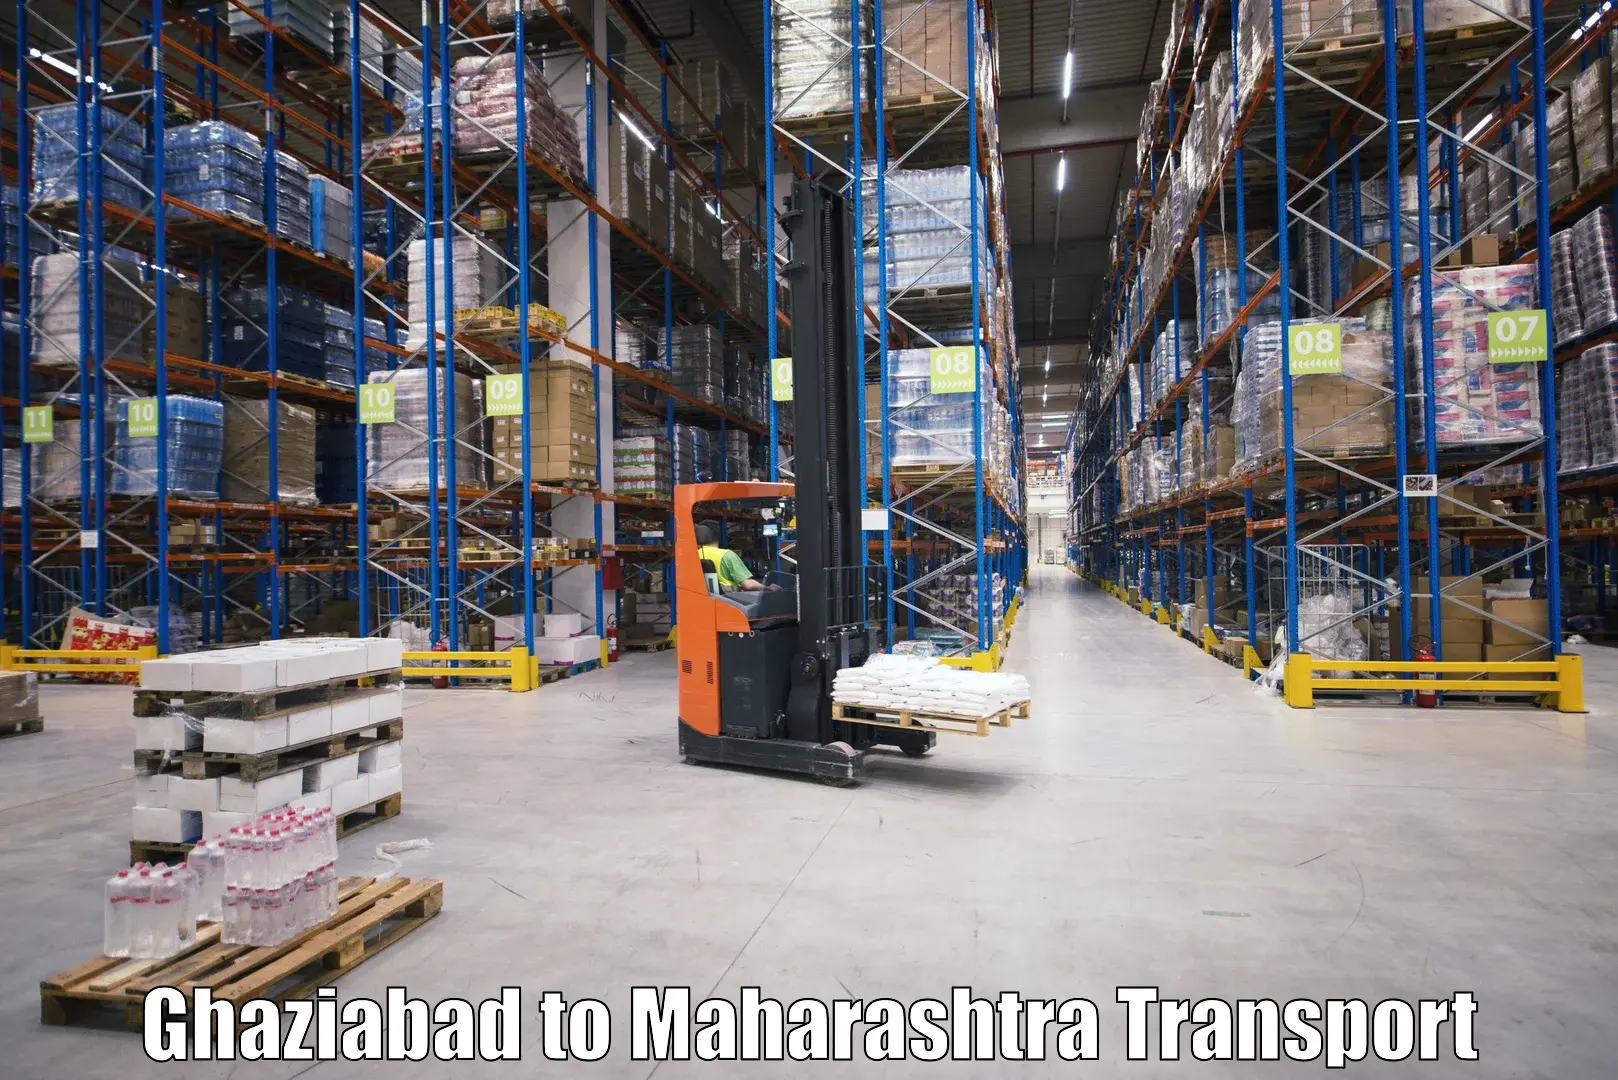 Truck transport companies in India Ghaziabad to Nagpur